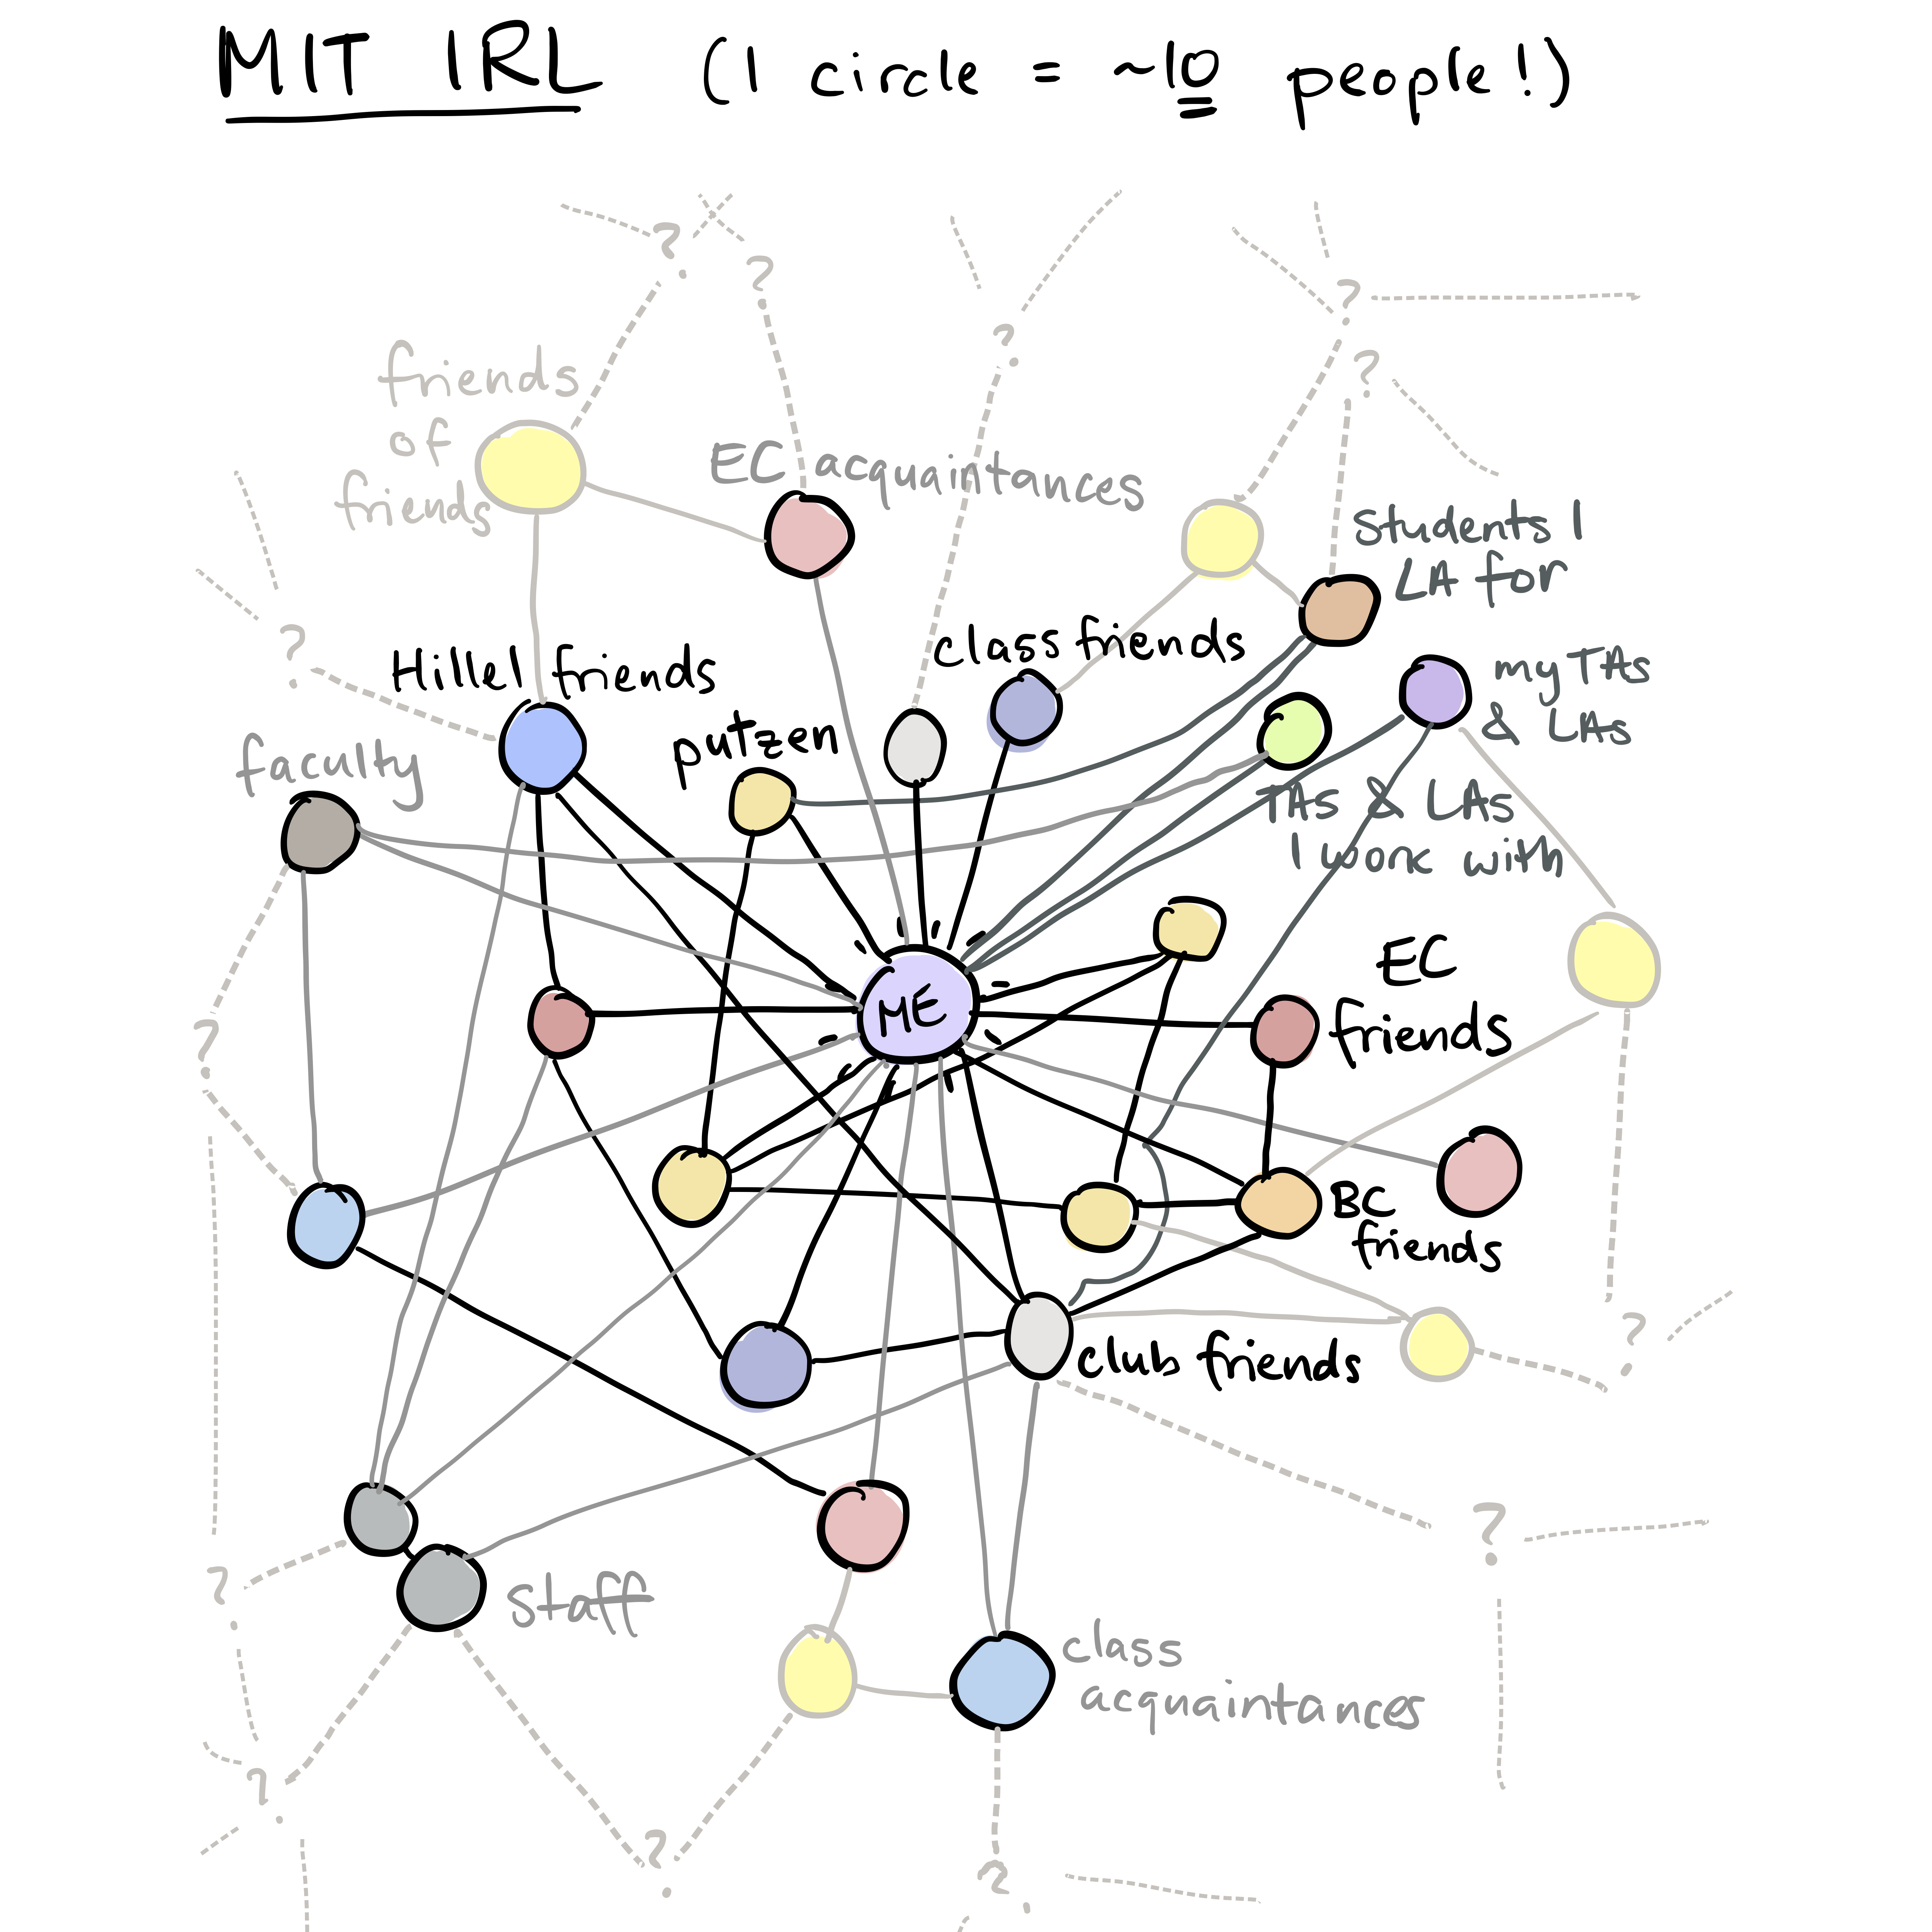 A similar graph, but titled "MIT IRL". The legend says one node = ten people. This graph is much messier and shows my connections to lots of different groups of people. It also shows their connections to each other, and to nodes that aren't even on the graph.